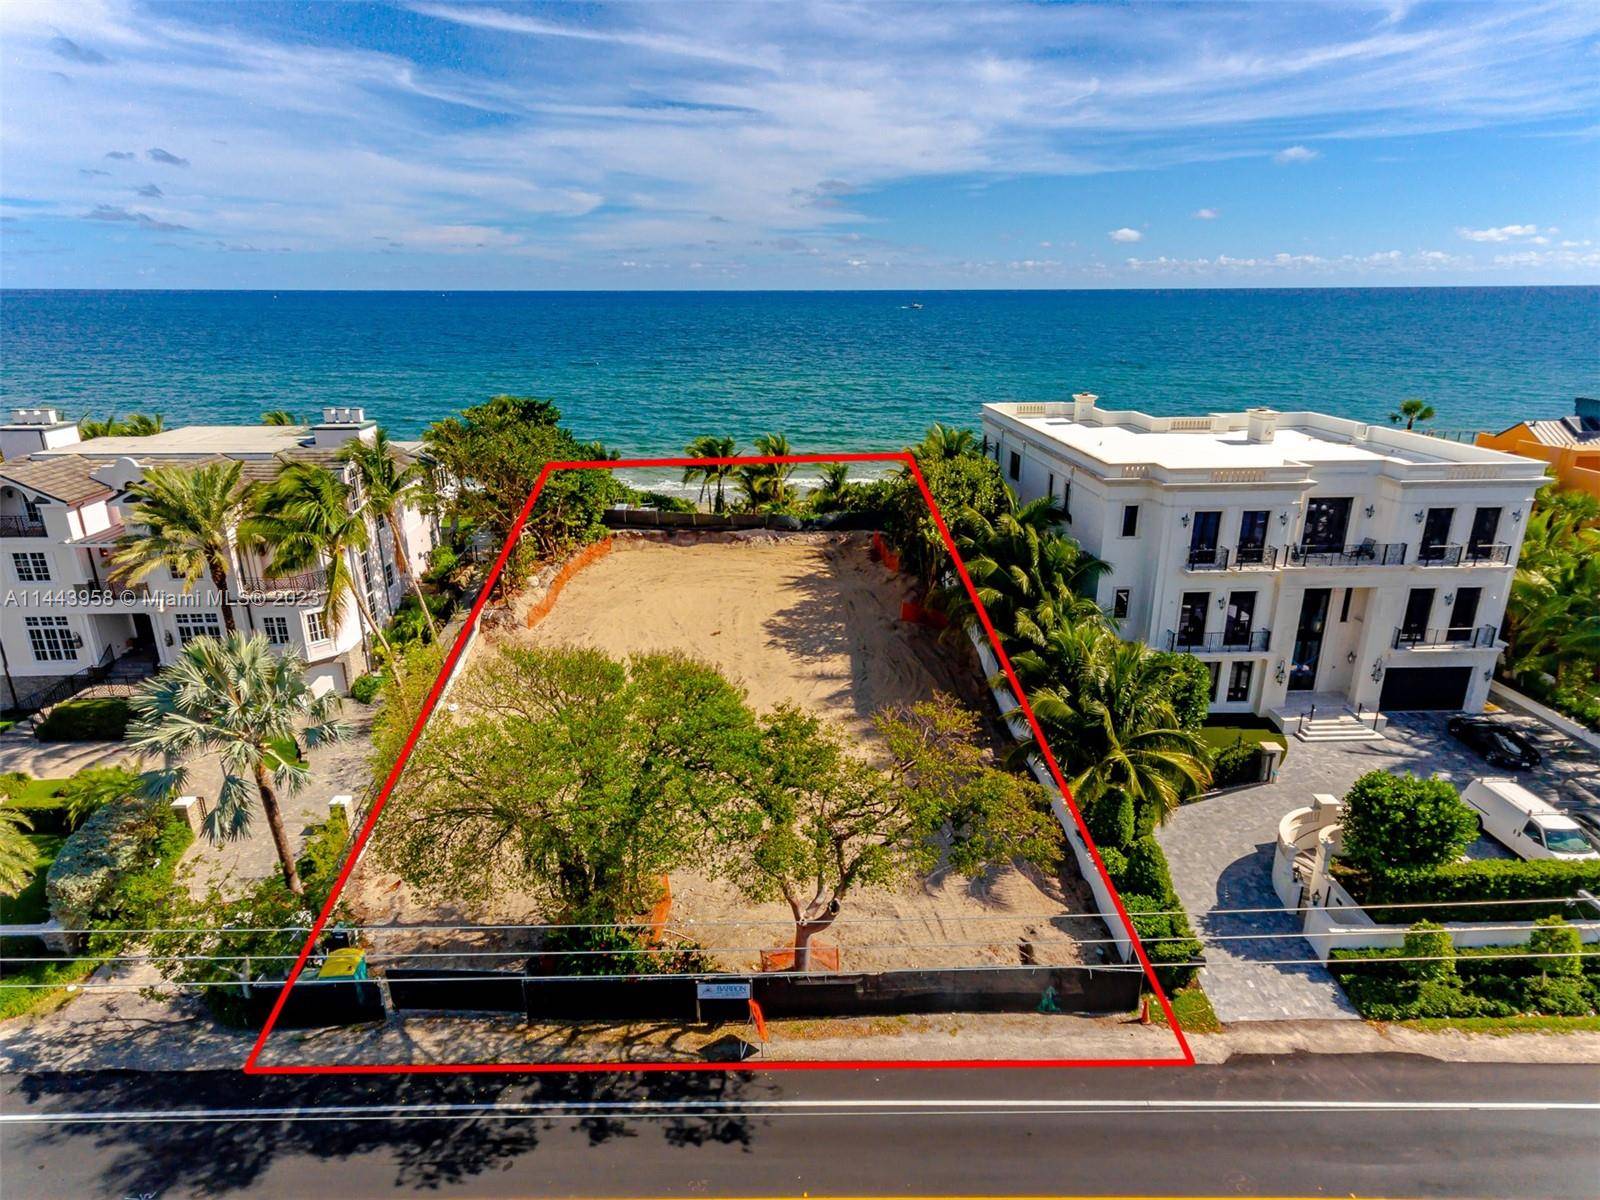 CITY STATE APPROVED PLANS TO BUILD YOUR CUSTOM OCEANFRONT DREAM HOME ON THE OCEAN WITH YOUR OWN PRIVATE BEACH AND A PRIVATE 70 feet DOCK ON THE THE INTRACOASTAL WATERWAY.